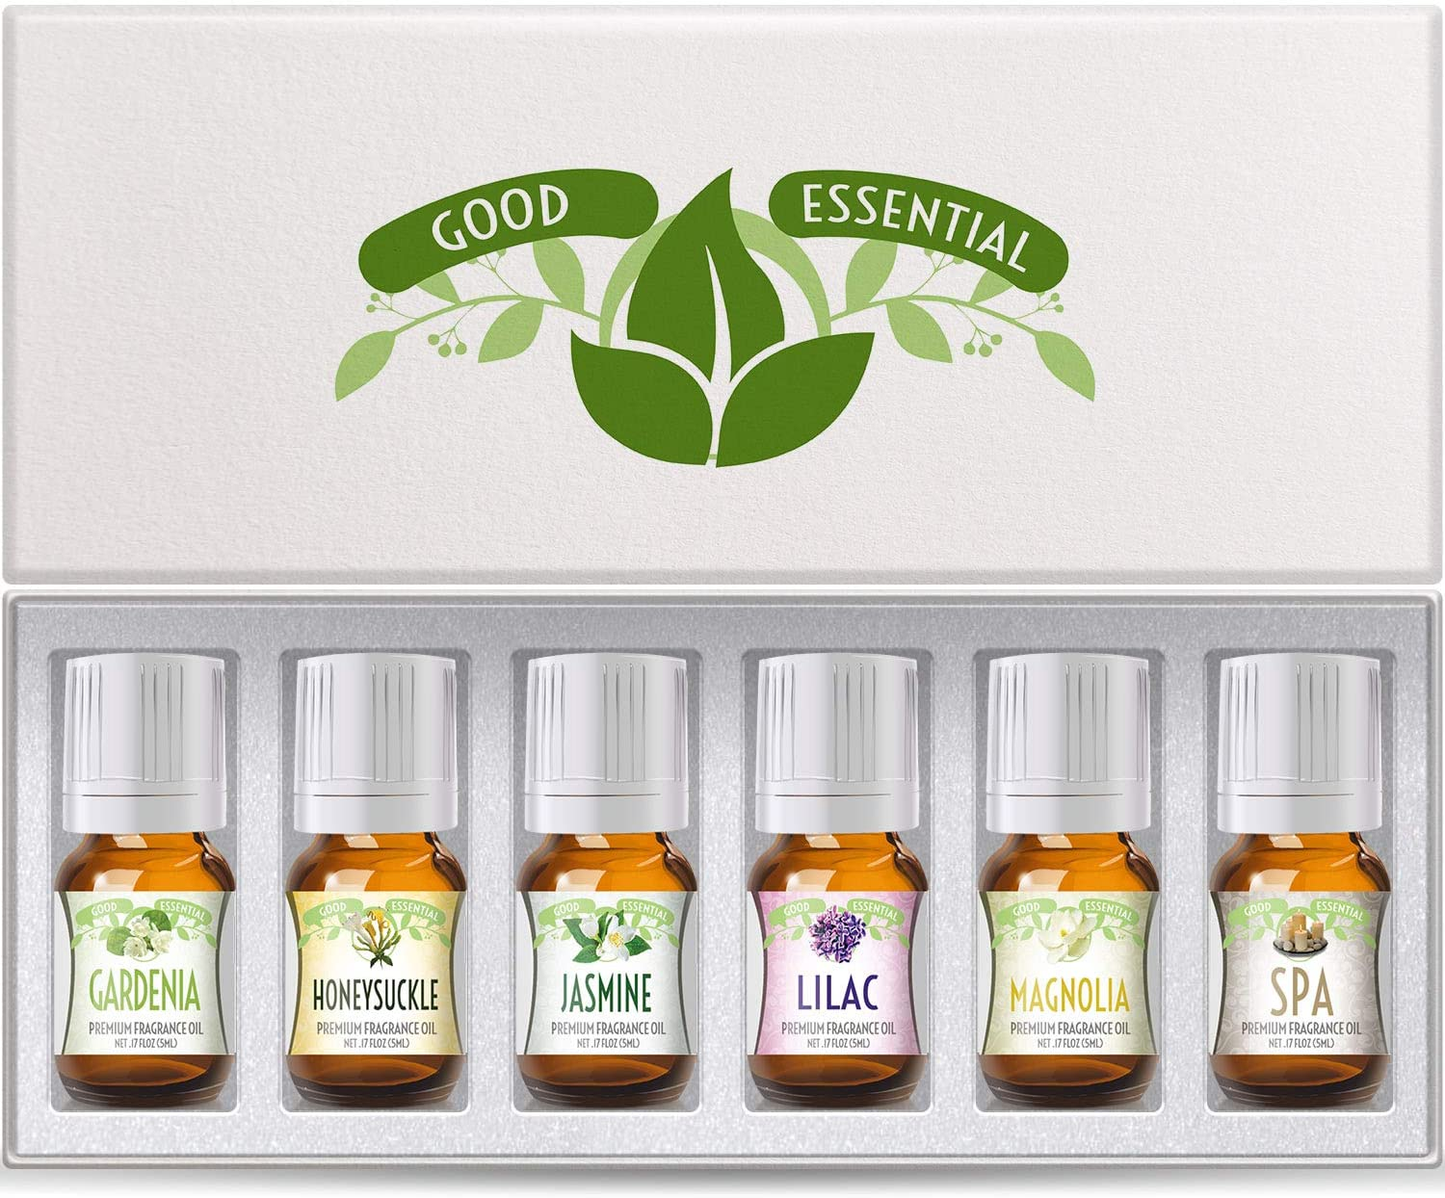 Fragrance Oils Set of 6 Scented Oils from Good Essential - Gardenia Oil, Lilac Oil, Honeysuckle Oil, Jasmine Oil, Magnolia Oil, Spa Oil: Aromatherapy, Perfume, Soaps, Candles, Slime, Lotions!